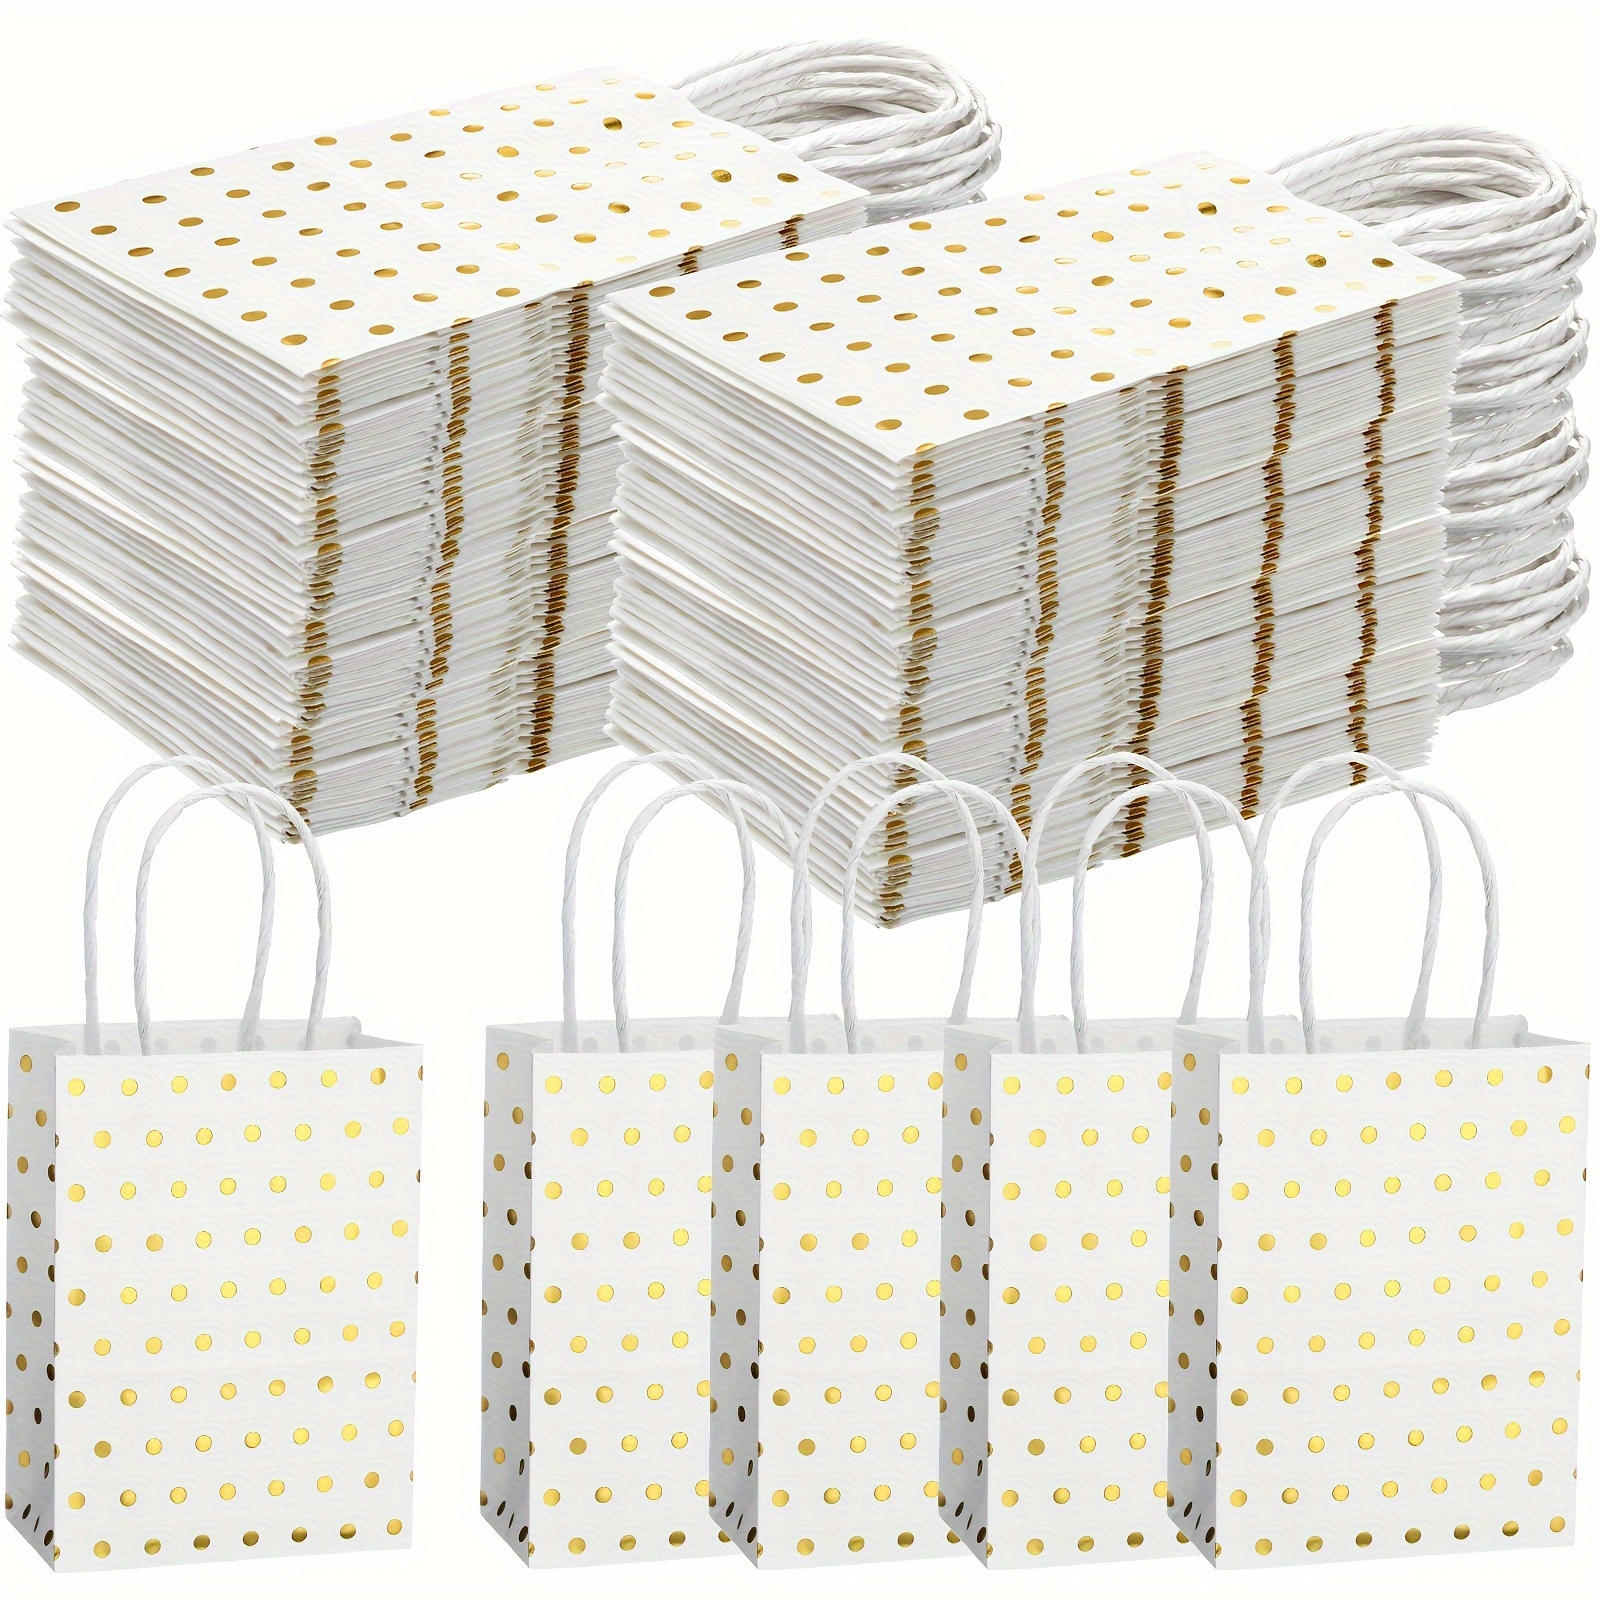 

50 Pcs Christmas Gold Foil Dot Paper Gift Bags With Handles Small Gift Bags Bulk Party Favor Bags For Birthday Wedding Gift Treat Wrapping, 5.9 X 4.3 X 2.4 Inch, White